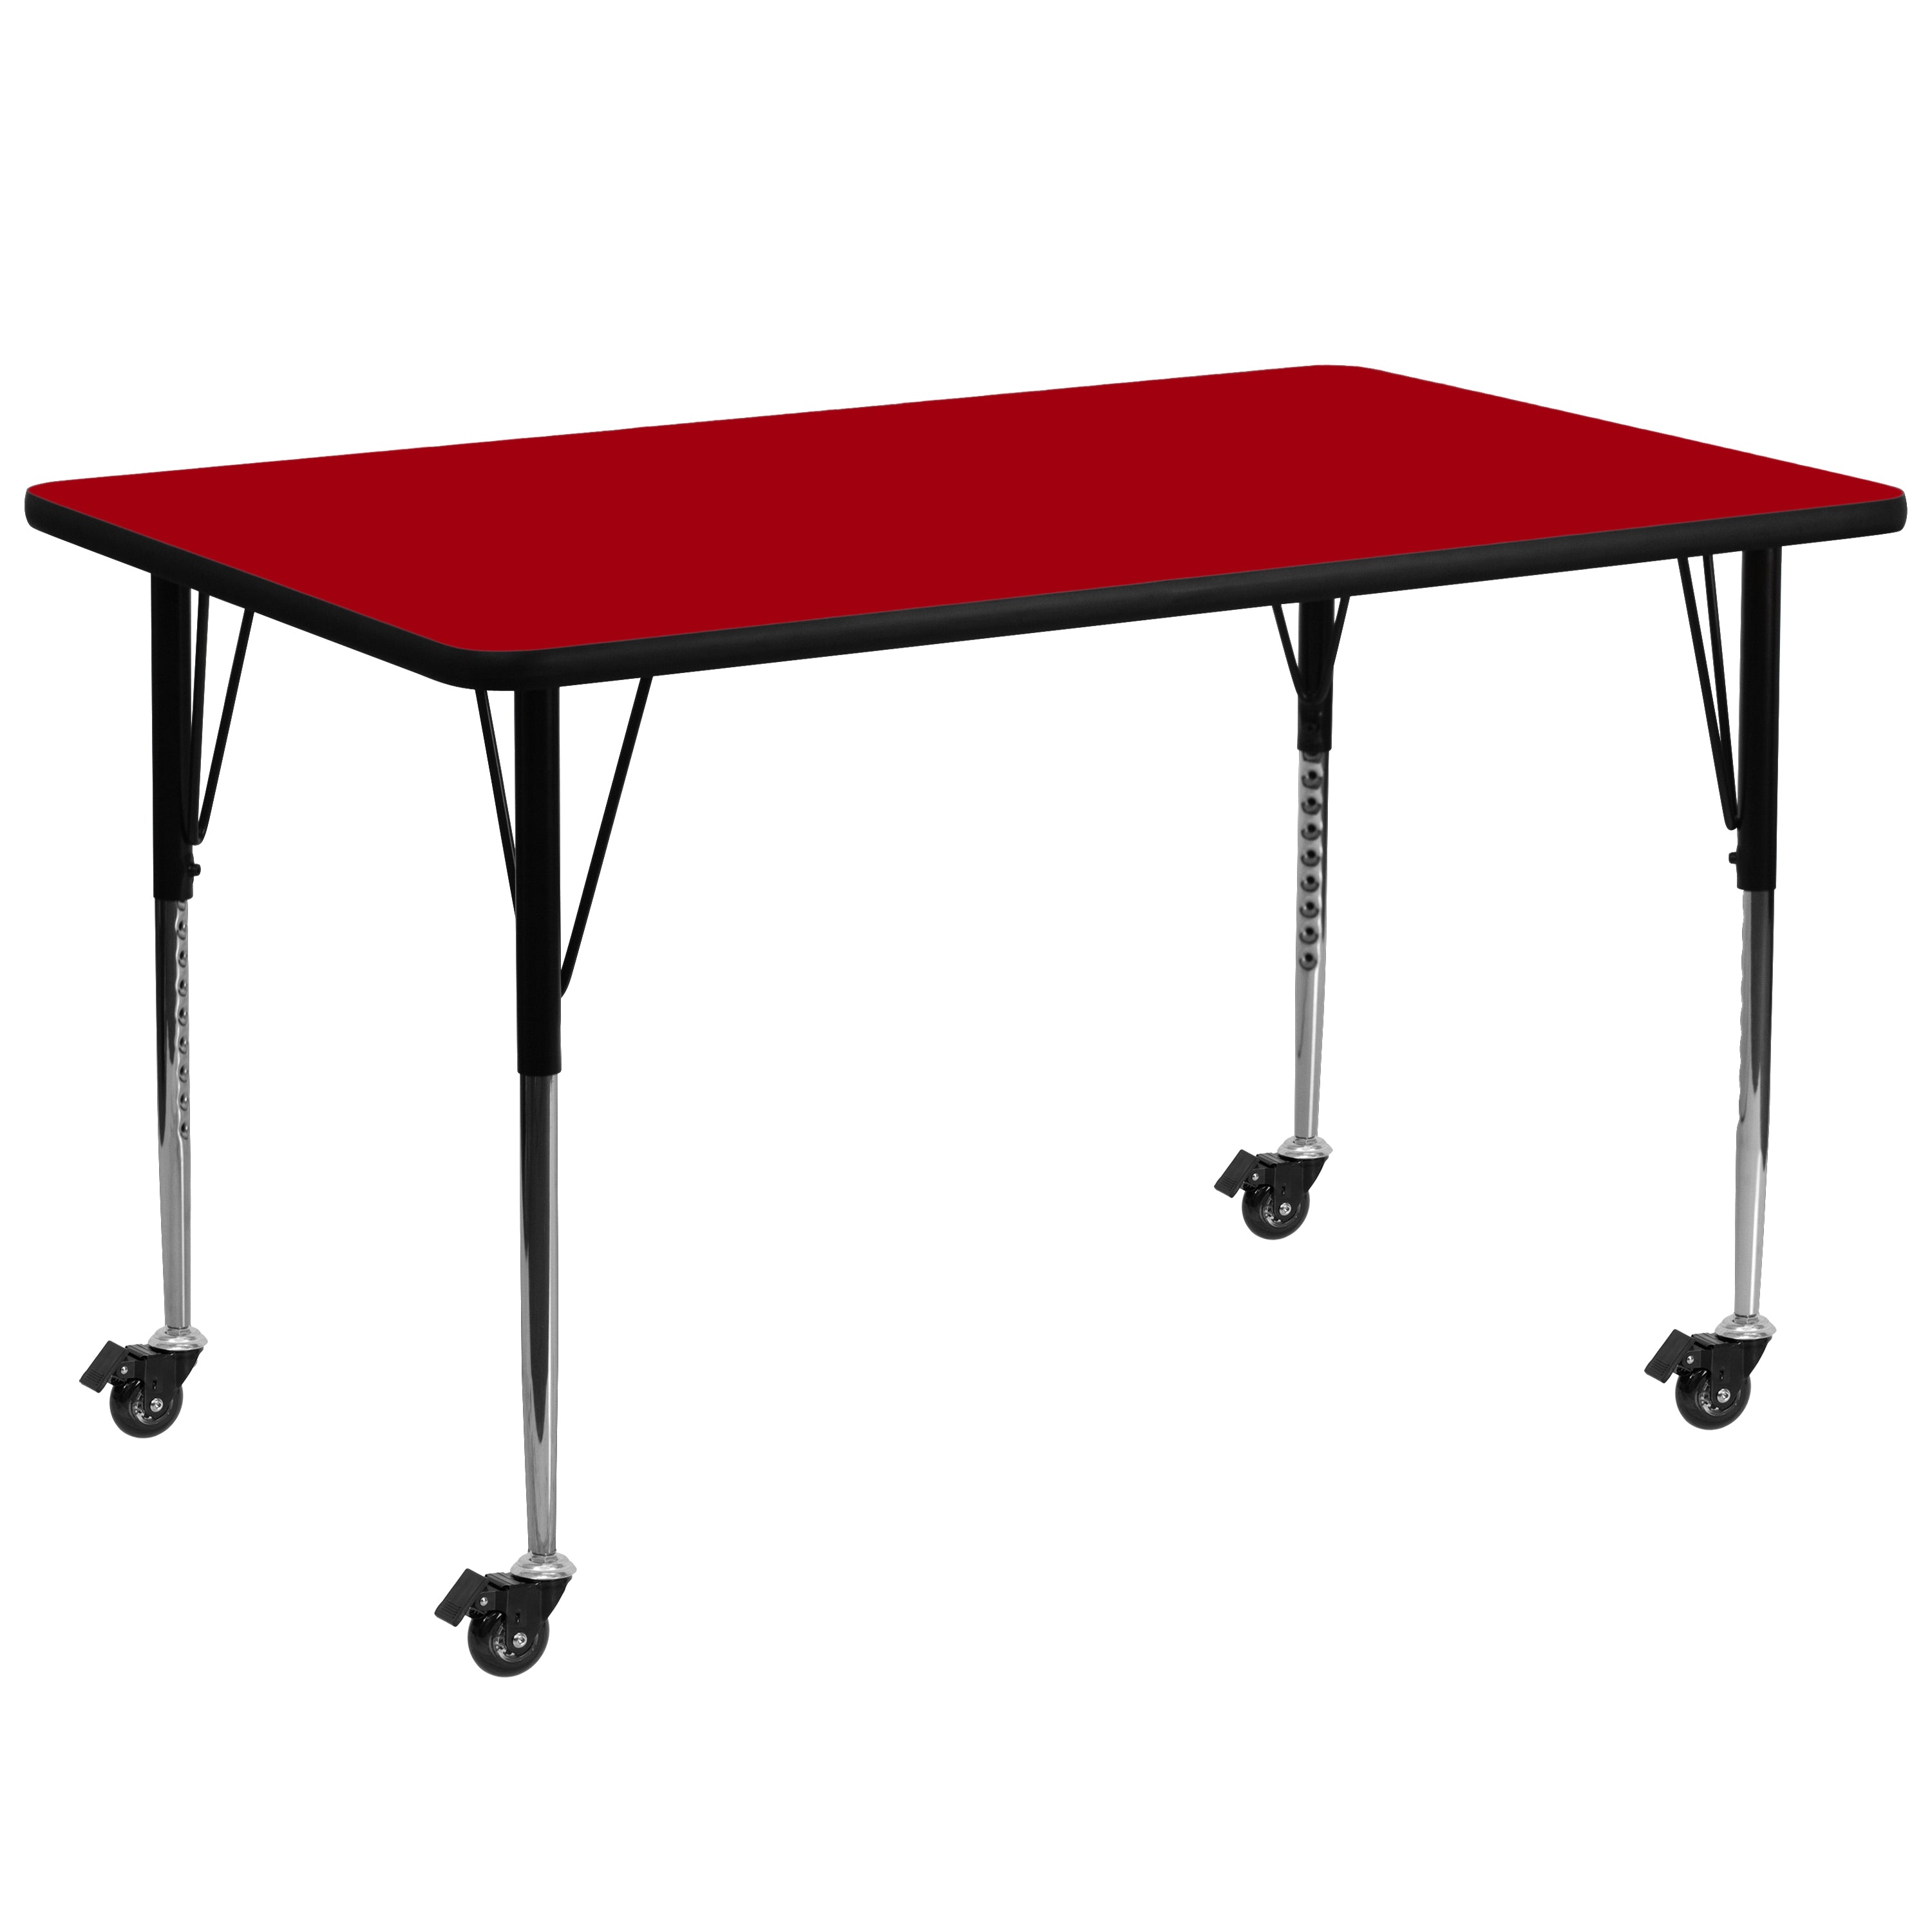 Mobile 30''W x 72''L Rectangular Thermal Laminate Activity Table - Standard Height Adjustable Legs-Rectangular Activity Table with Casters-Flash Furniture-Wall2Wall Furnishings